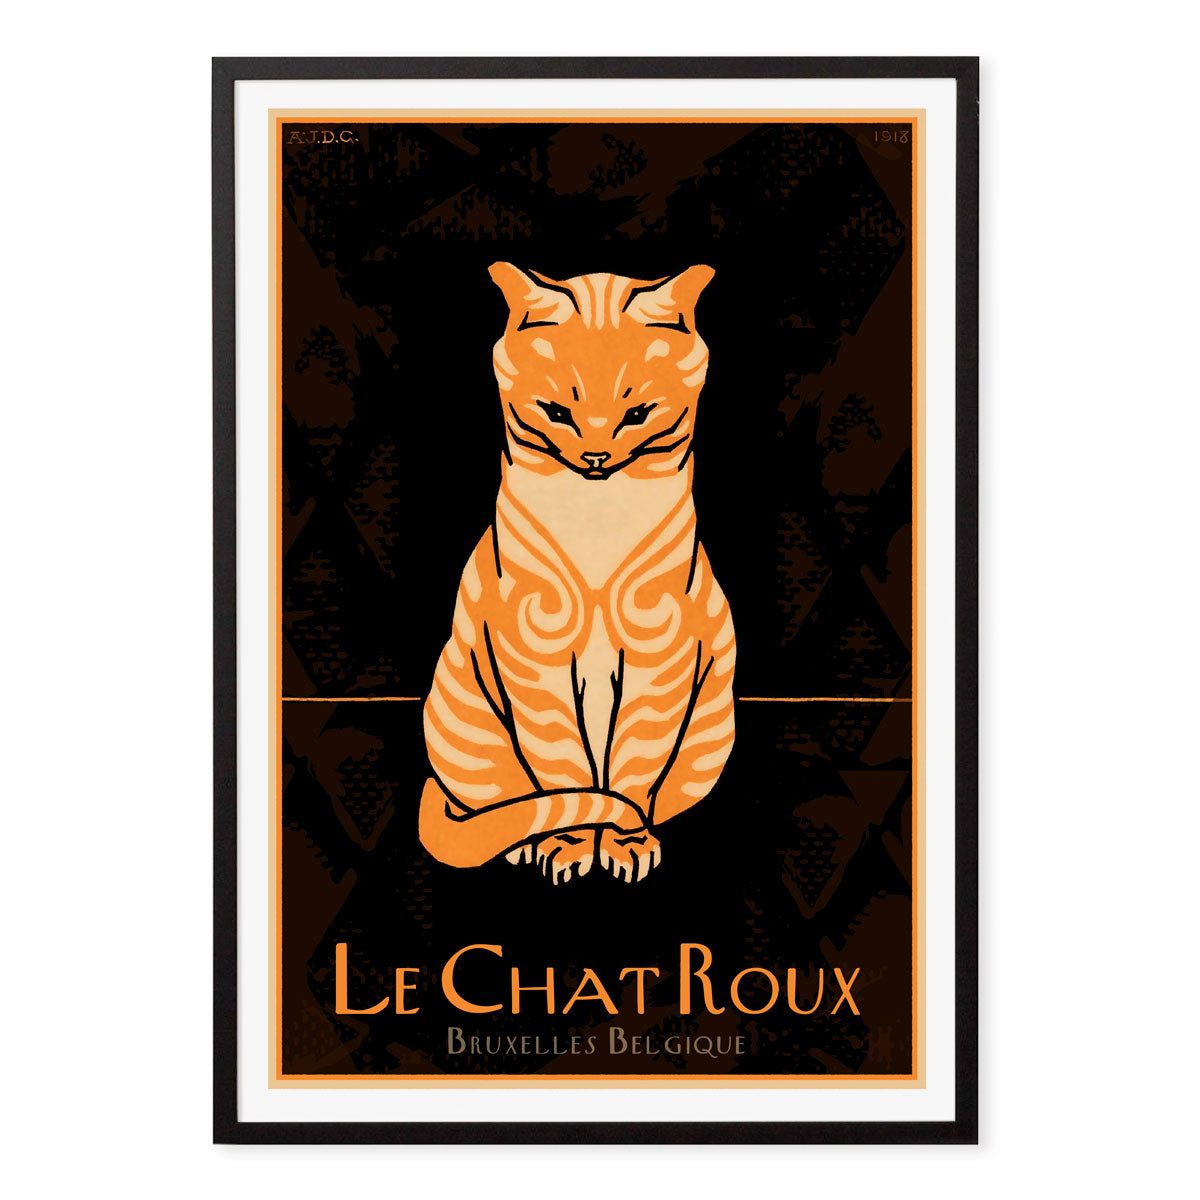 Le Chat Roux vintage retro poster print in black frame from Places We Luv